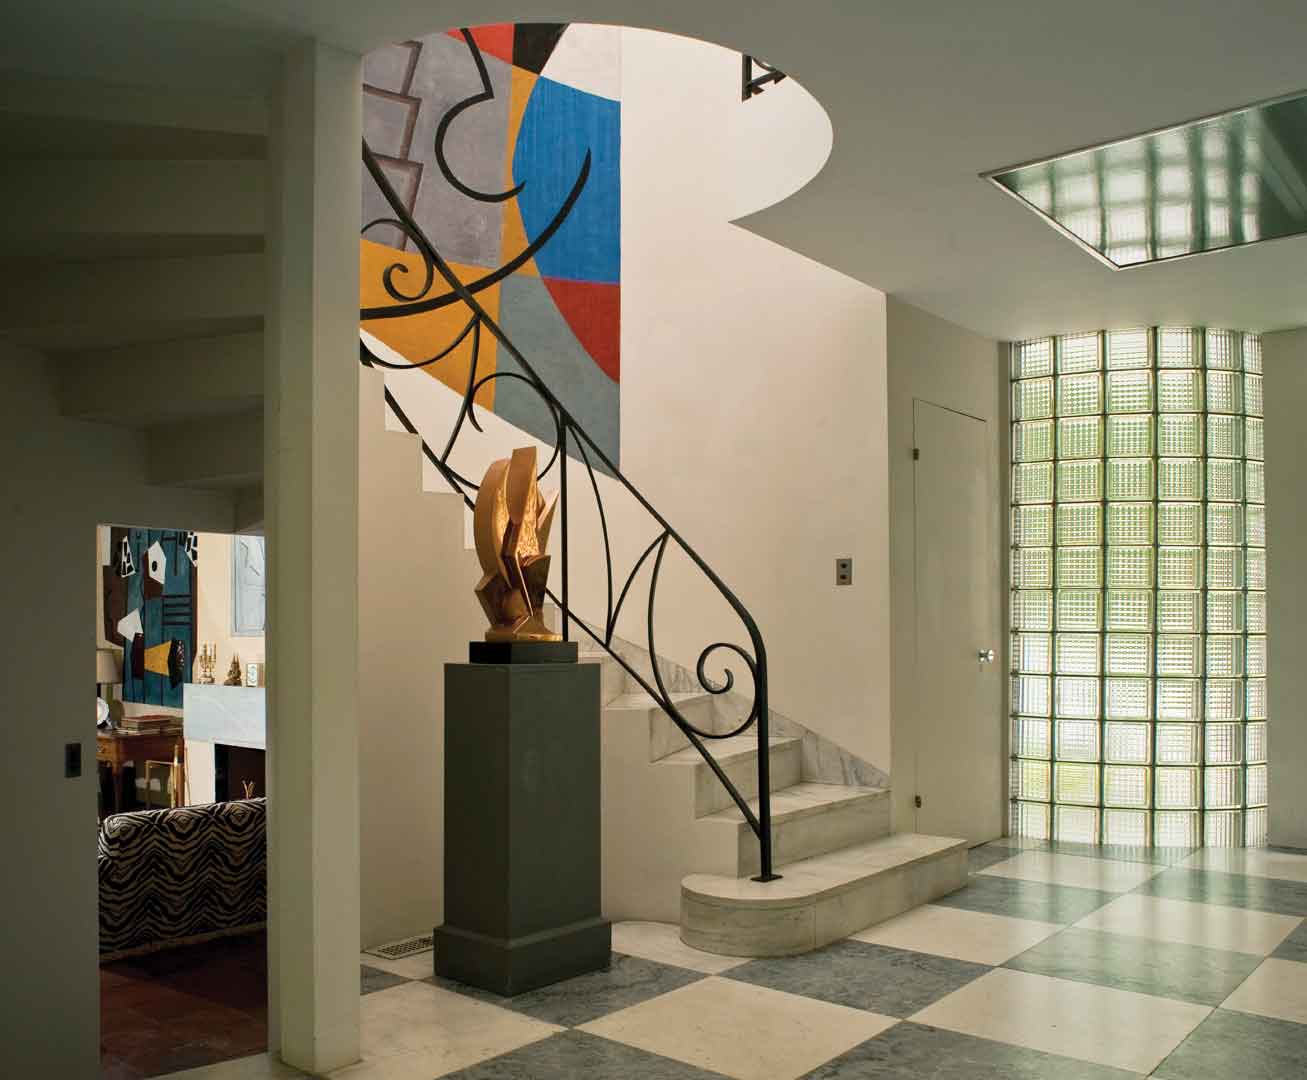 Foyer, with a glimpse into the living room, at the home of abstract painters Suzy Frelinghuysen and George L.K. Morris, featuring works by Morris (foyer fresco and sculpture; living room frescos and bas-relief); photo: Geoffrey Gross, courtesy Frelinghuysen Morris House & Studio, Lenox, Massachusetts